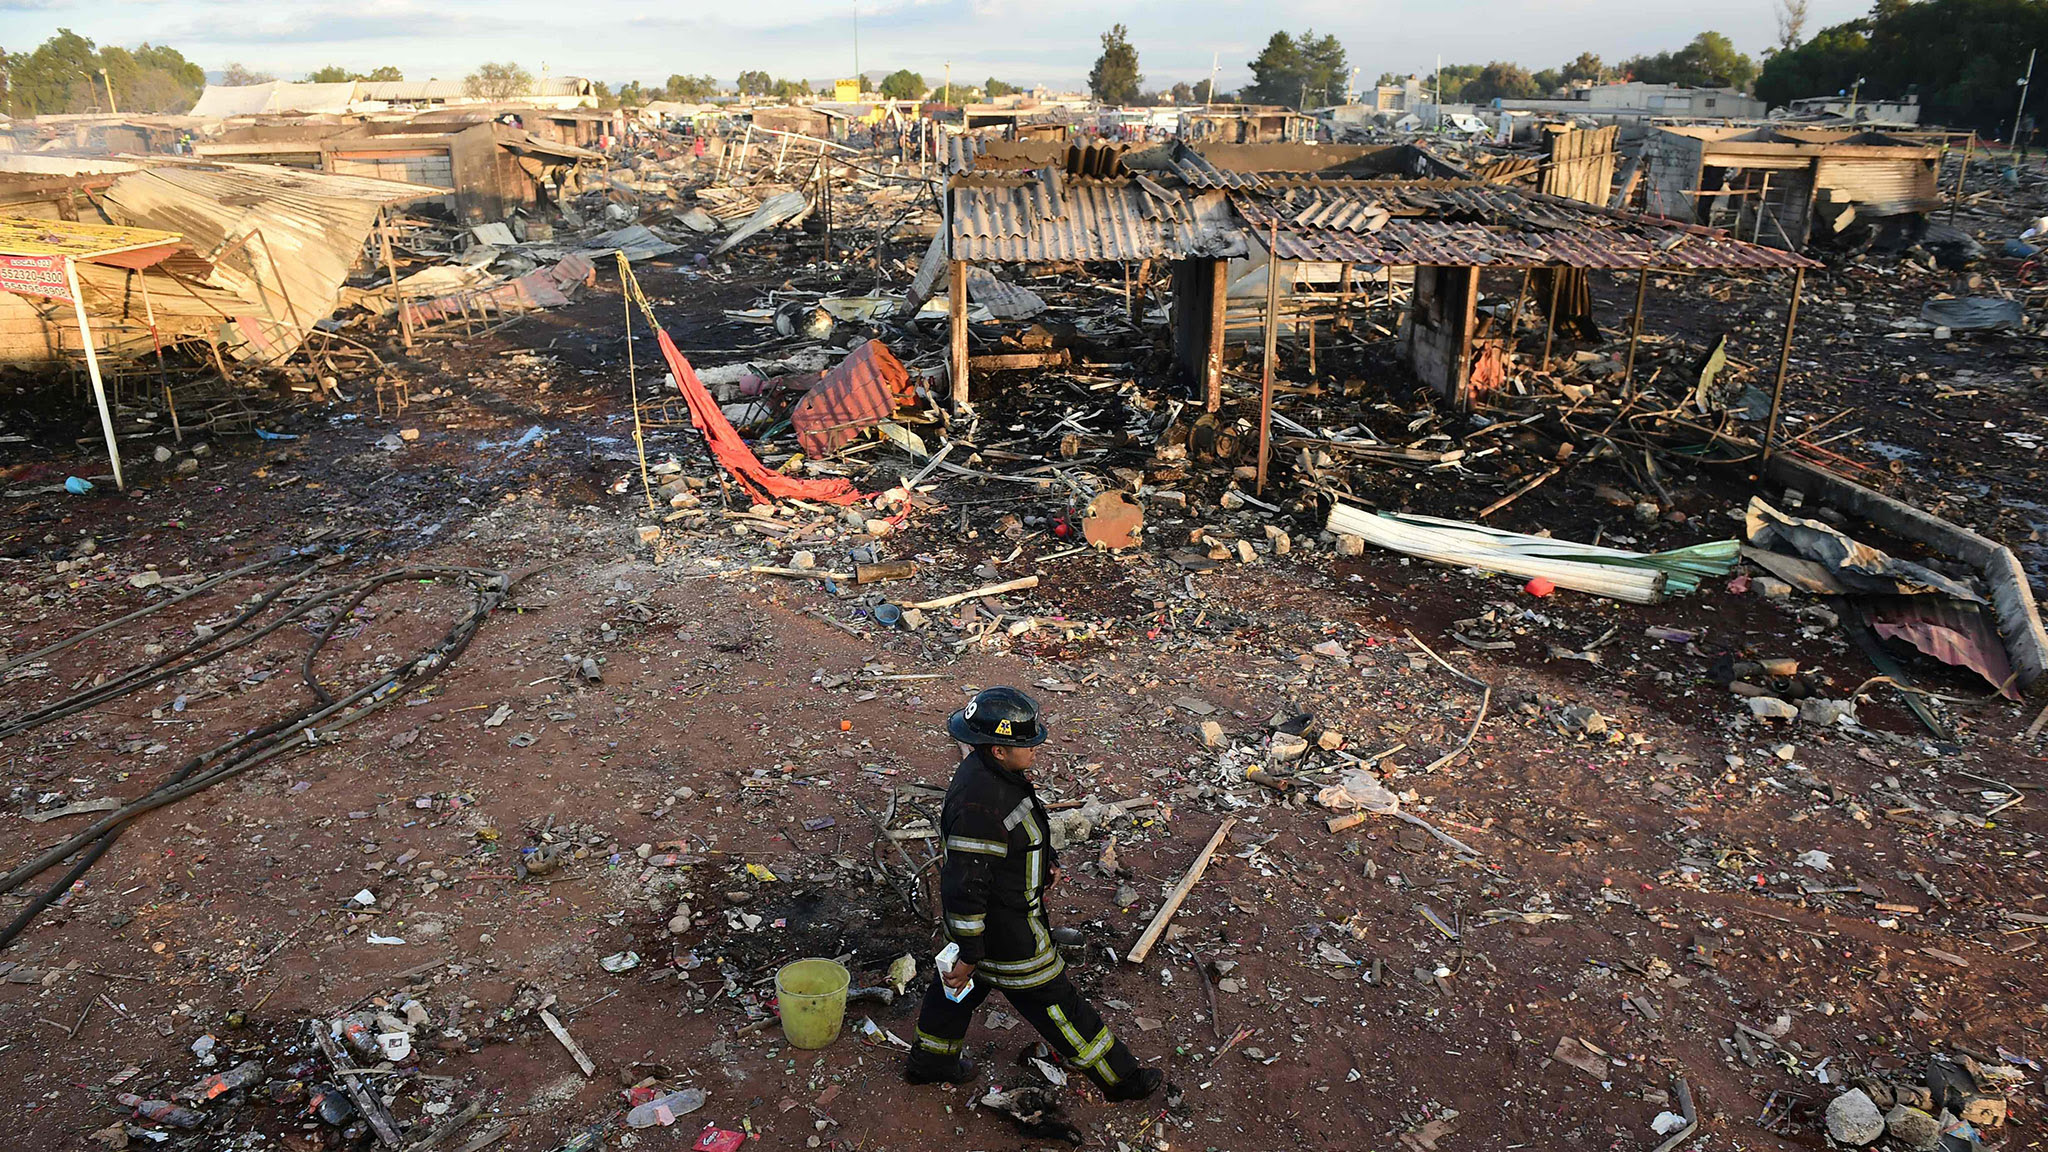 Firefighters work amid the debris